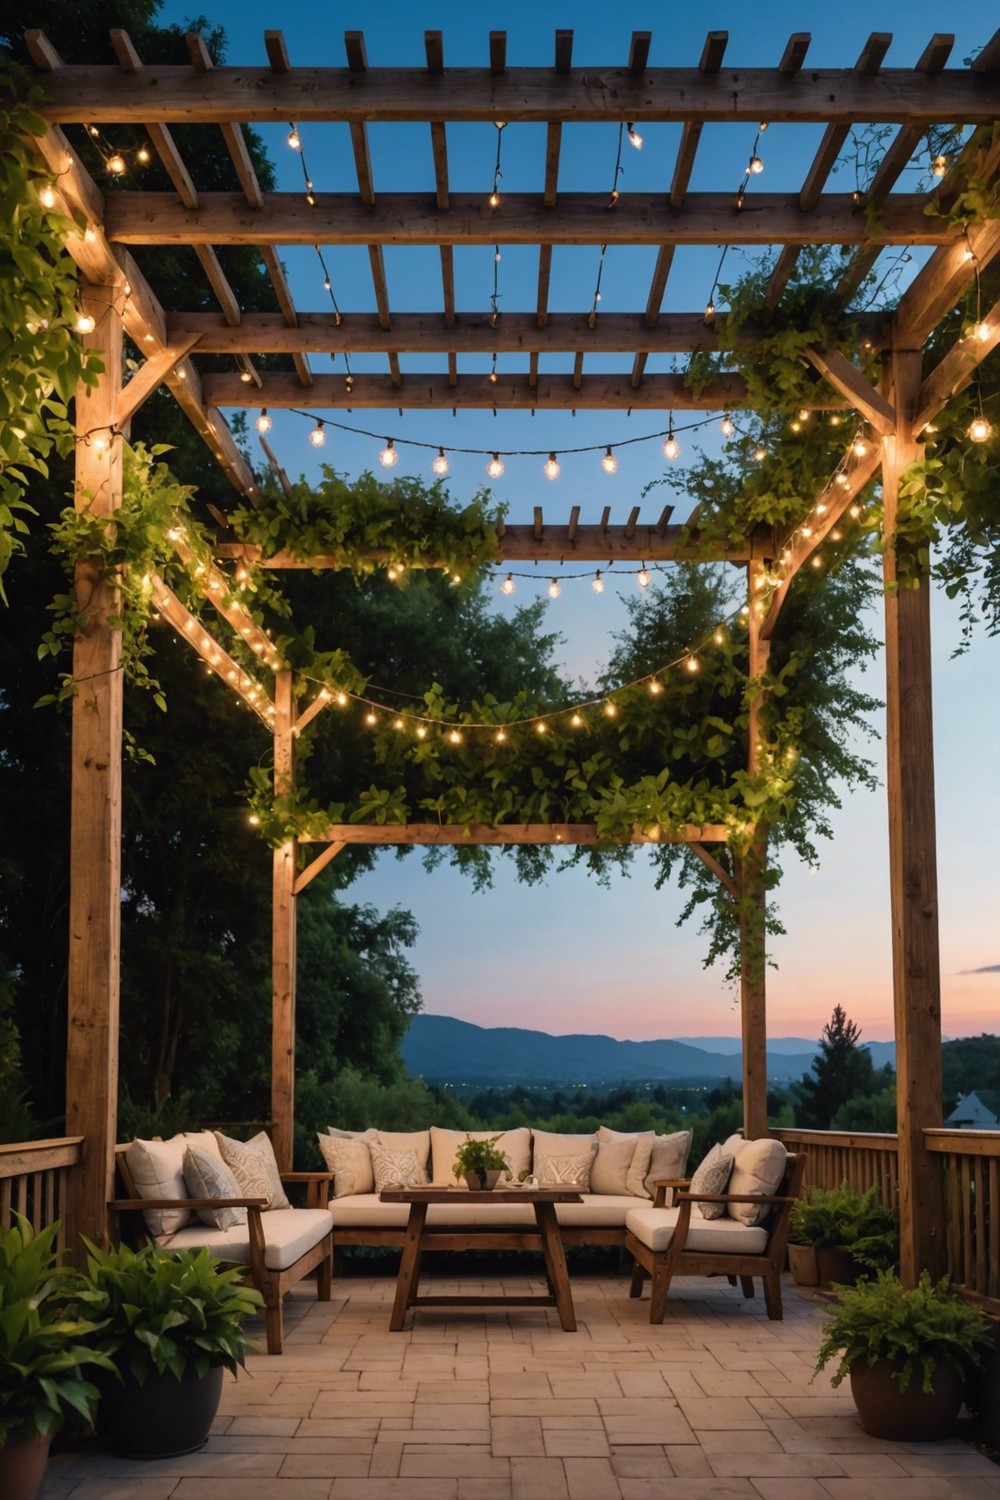 Rustic Wood Pergola with Twinkling Lights